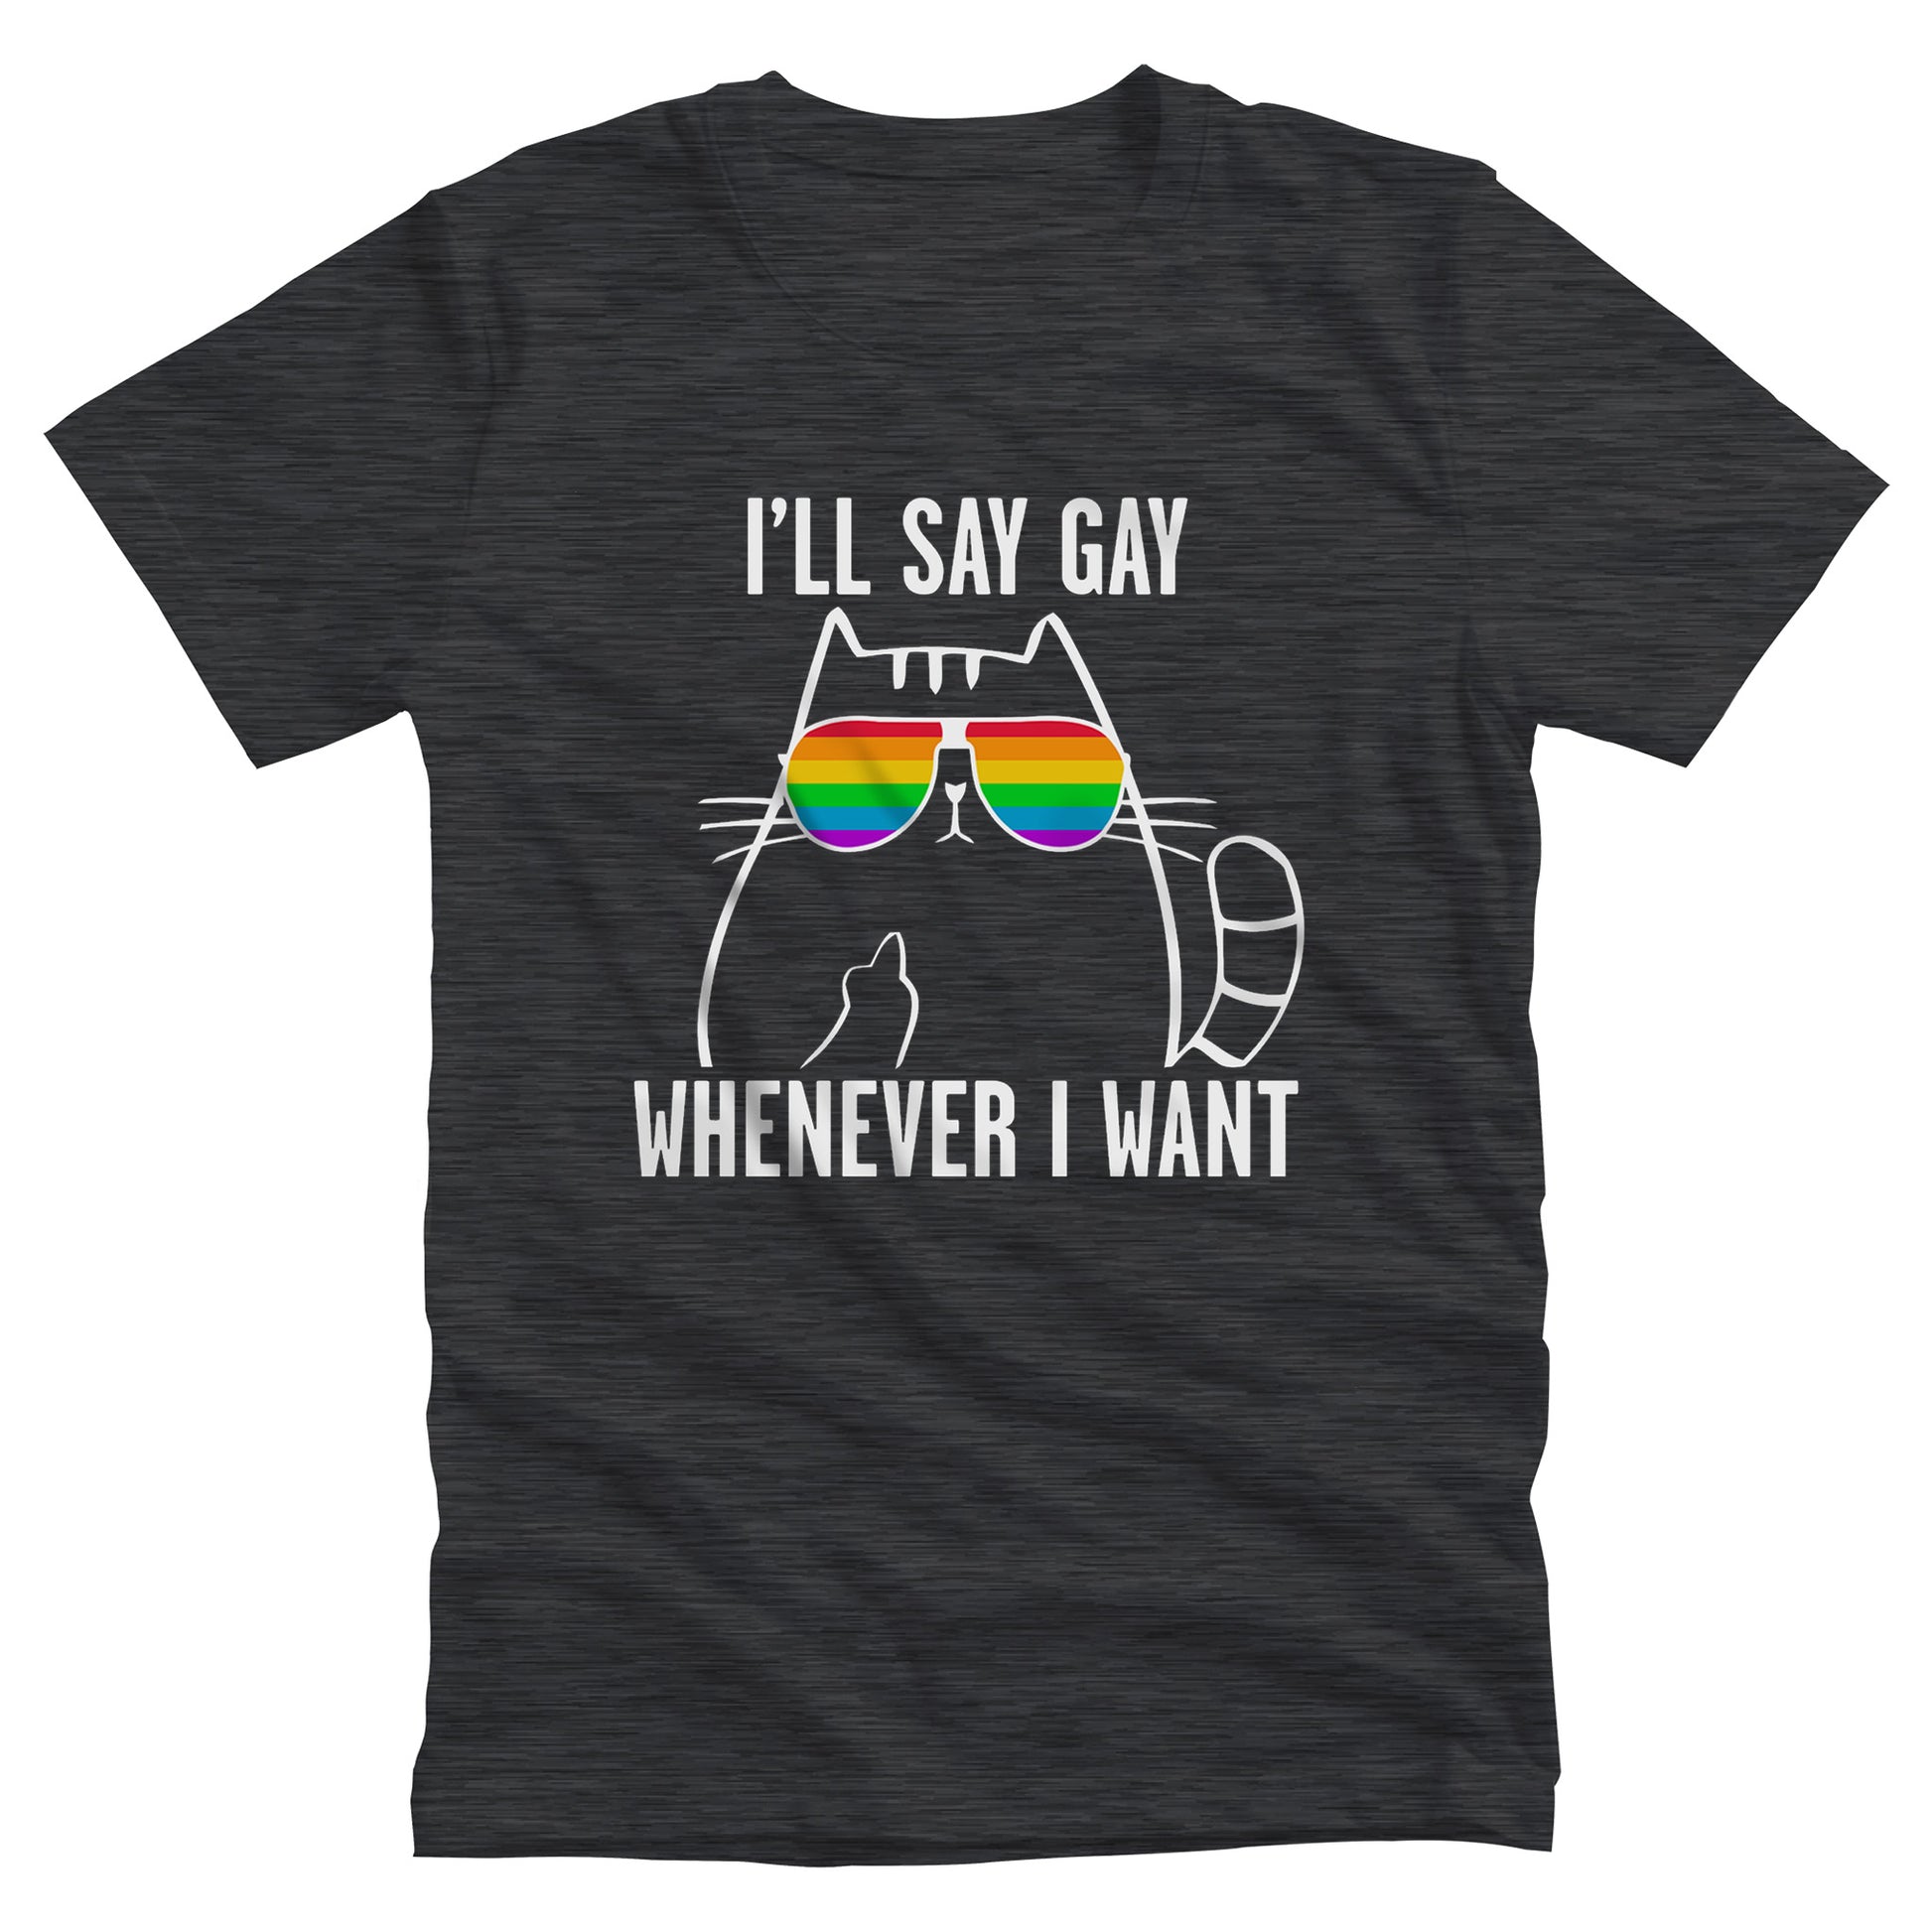 Dark Grey Heather color unisex t-shirt with a graphic of a cat wearing rainbow sunglasses. The text says, “I’ll Say Gay Whenever I Want” with the words “I’ll say gay” above the graphic and the rest of the text below the graphic. The cat is also holding up its middle finger.